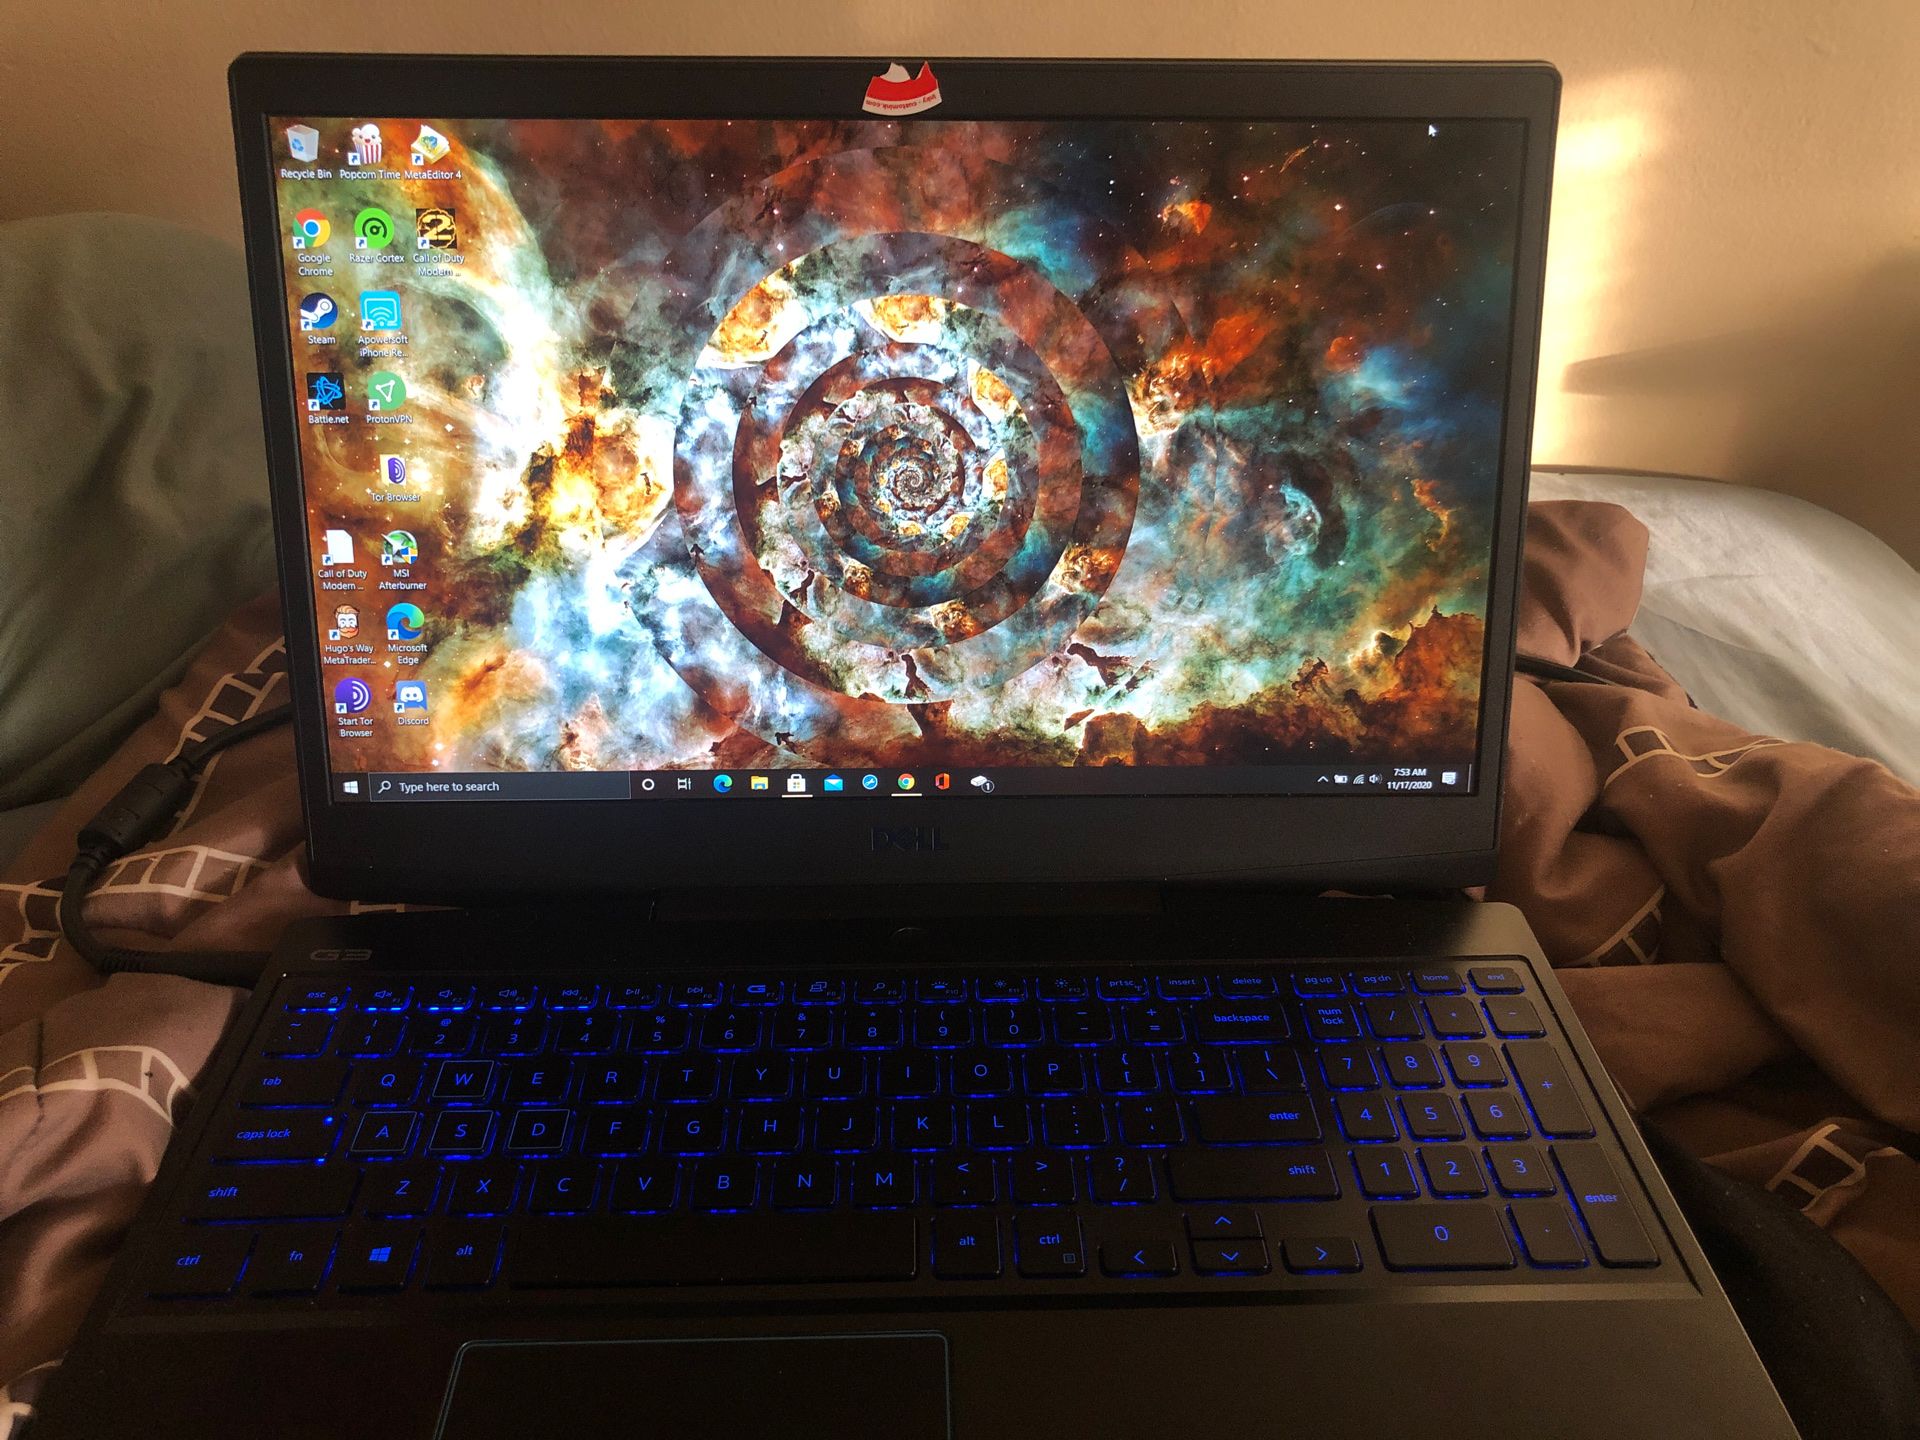 G3 dell gaming laptop. I can play any popular game with ease 60fps. Any questions just ask. Looking for $1,000